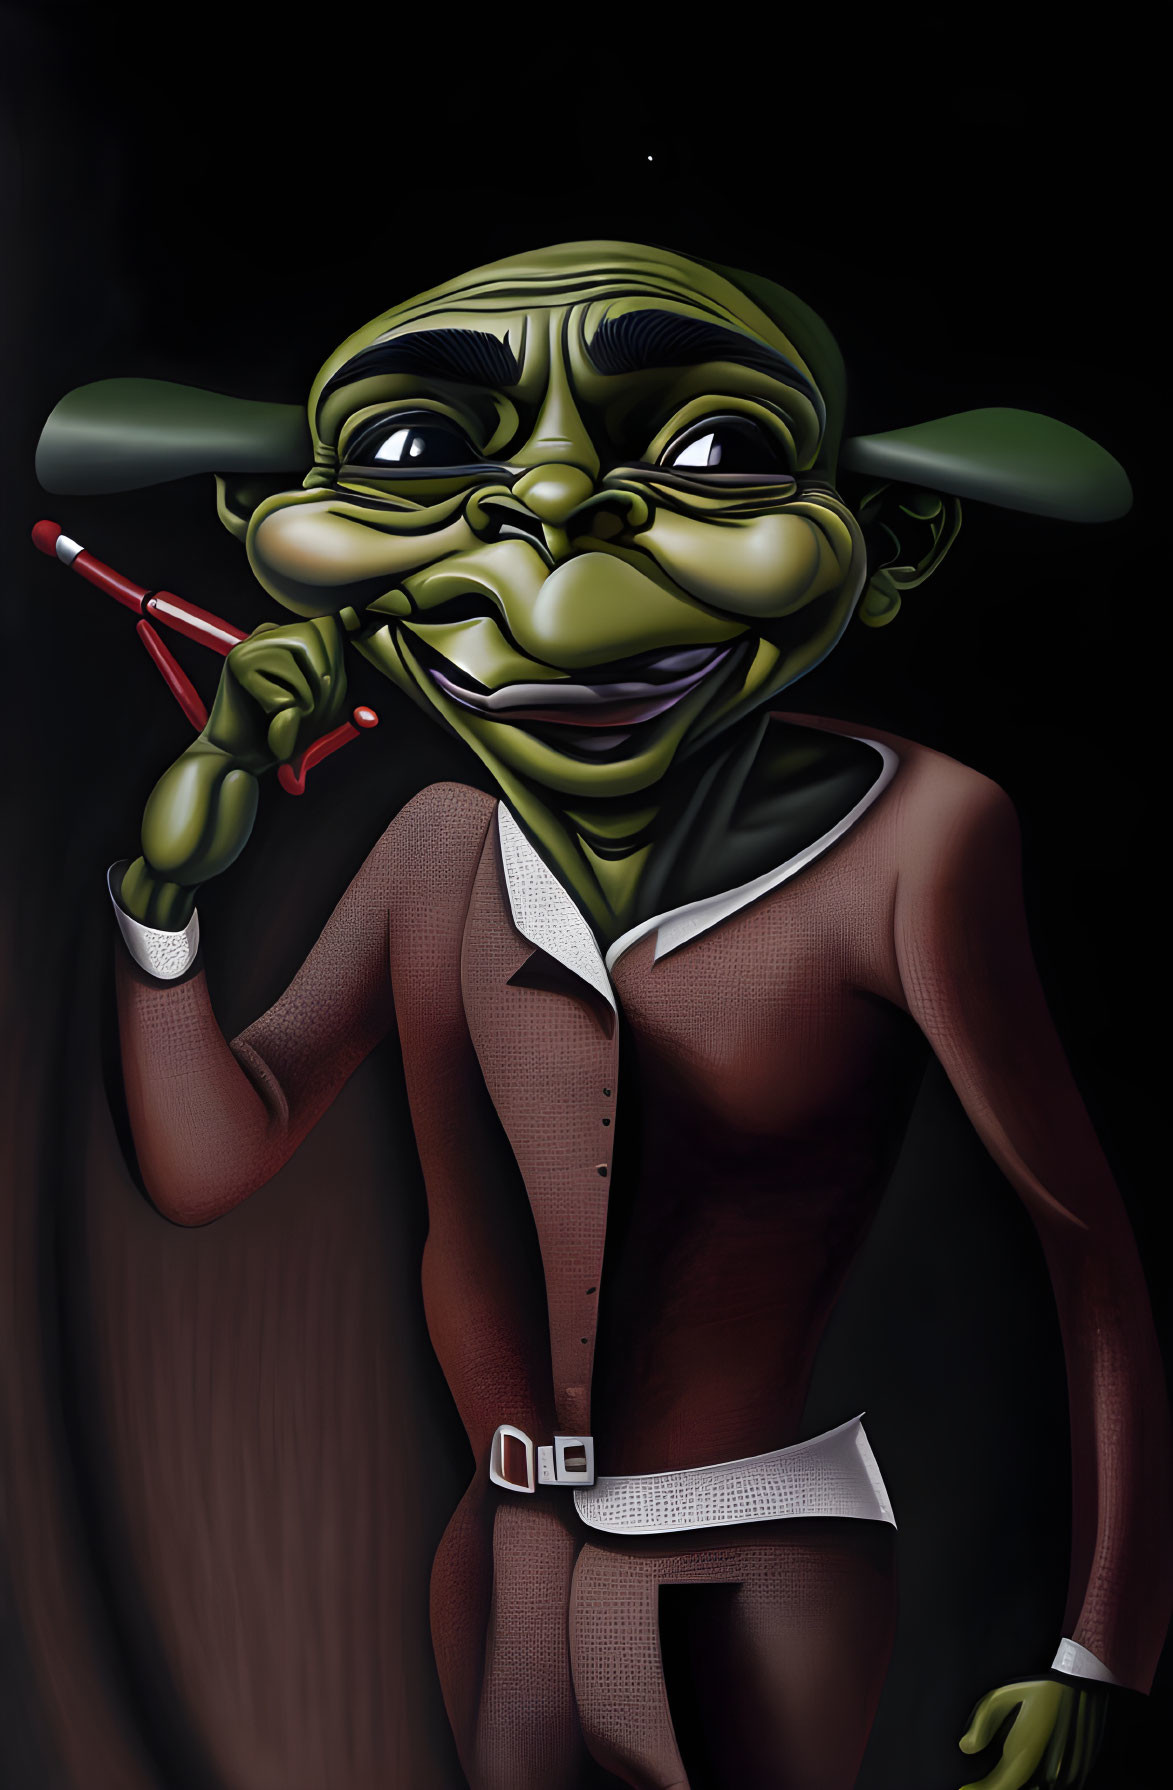 Green-skinned character in brown suit with pen and large ears